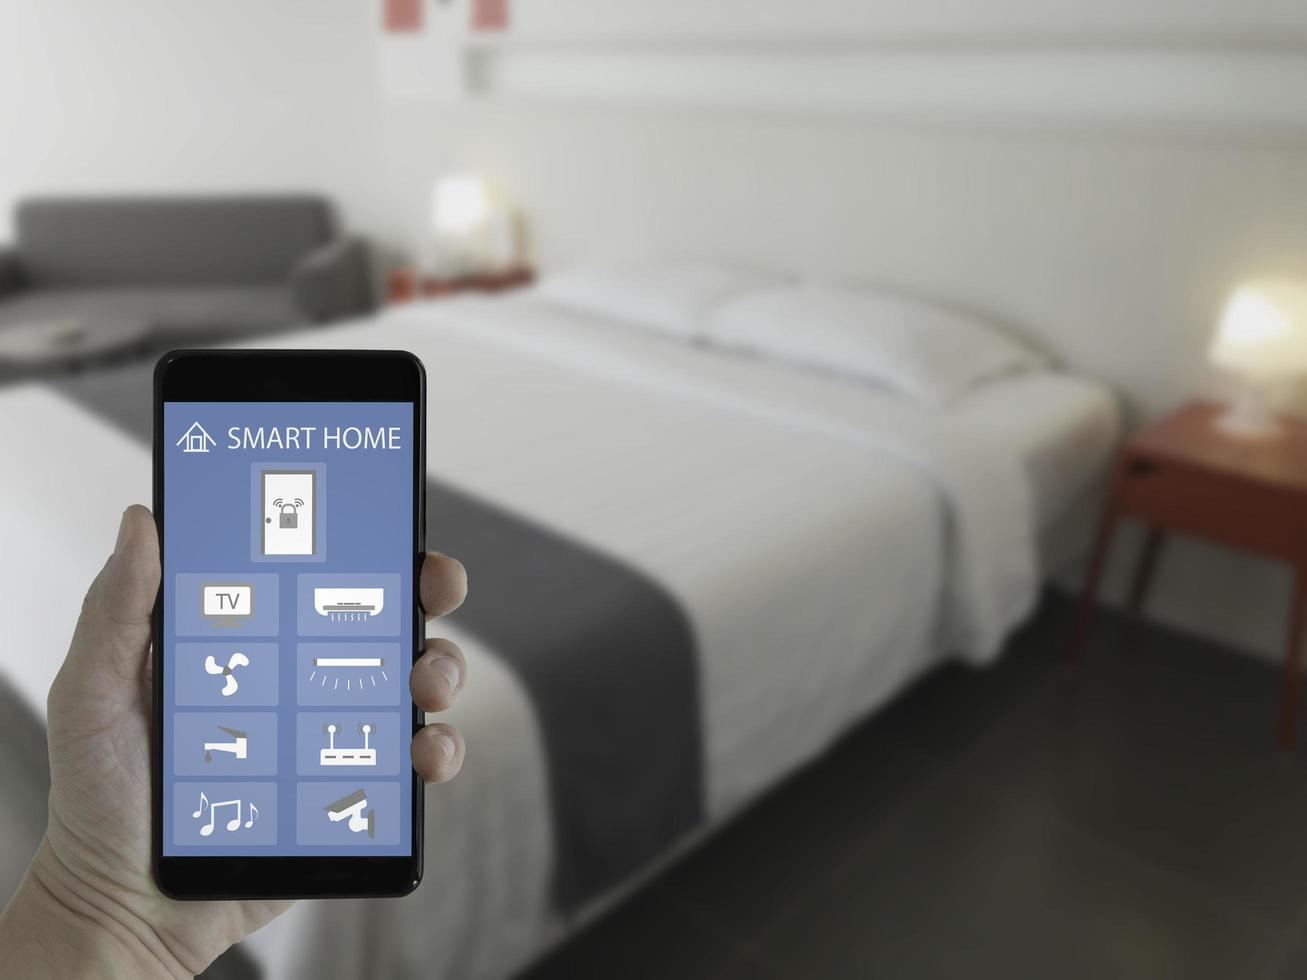 Smart home technology applications on smartphone screen with blurred bedroom background. photo